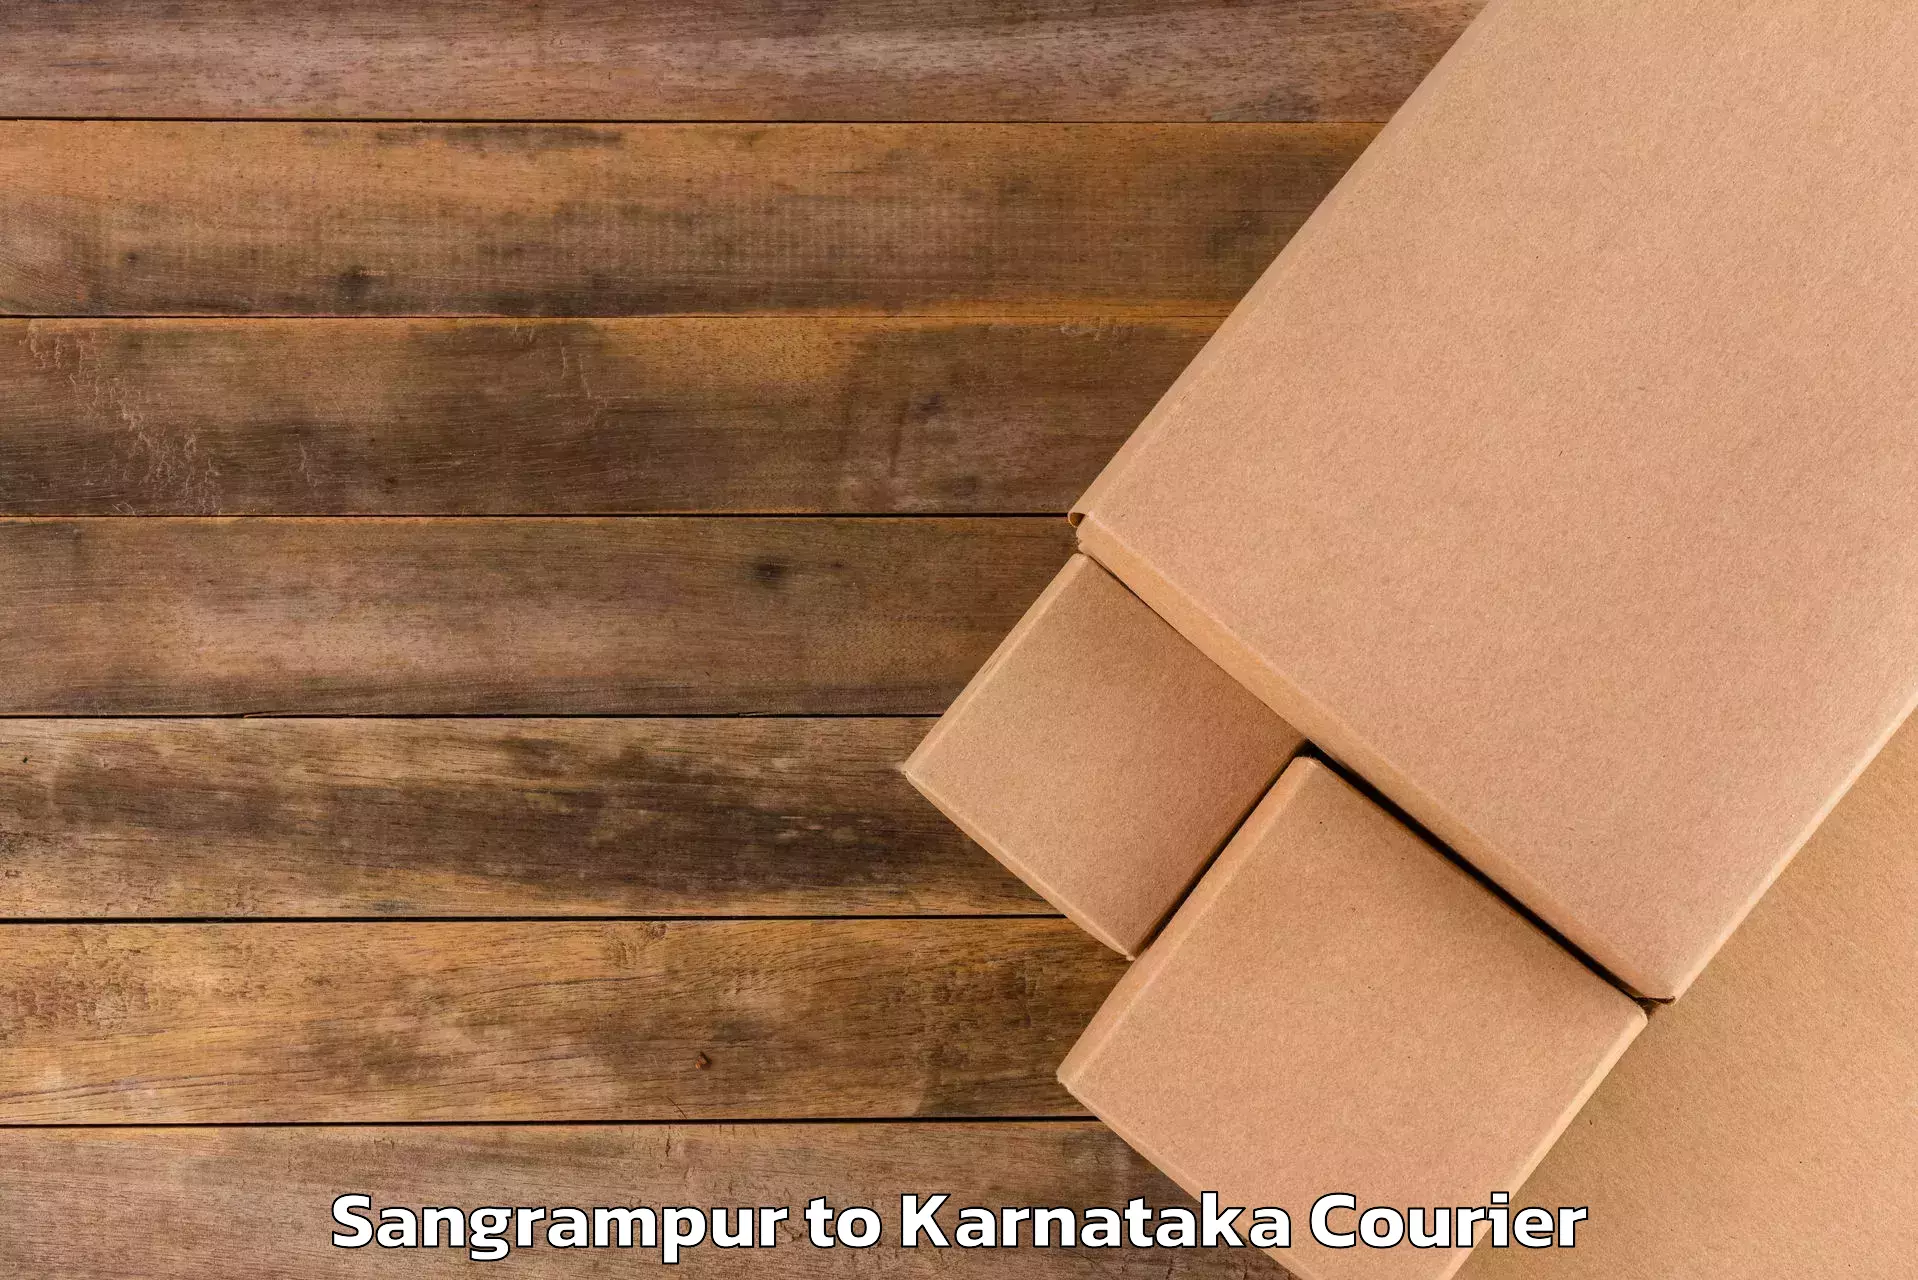 Personal effects shipping Sangrampur to Mangalore Port